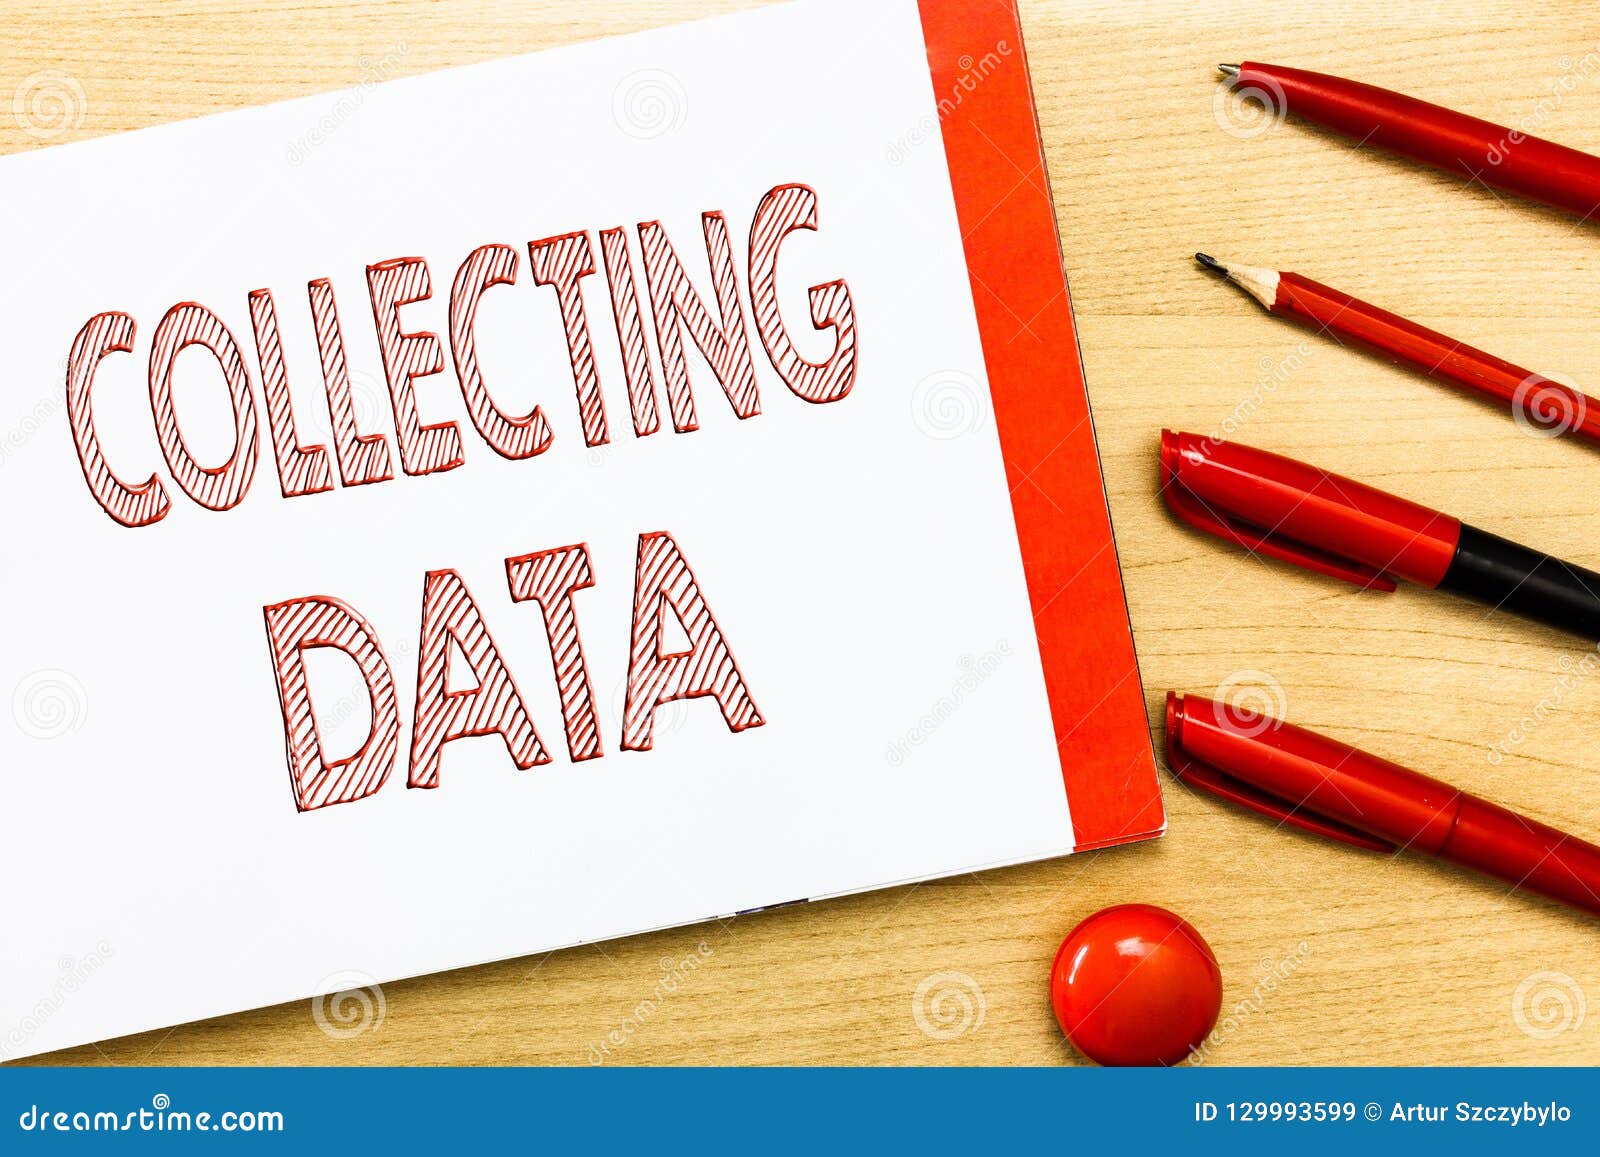 Handwriting data collection. Writing collection